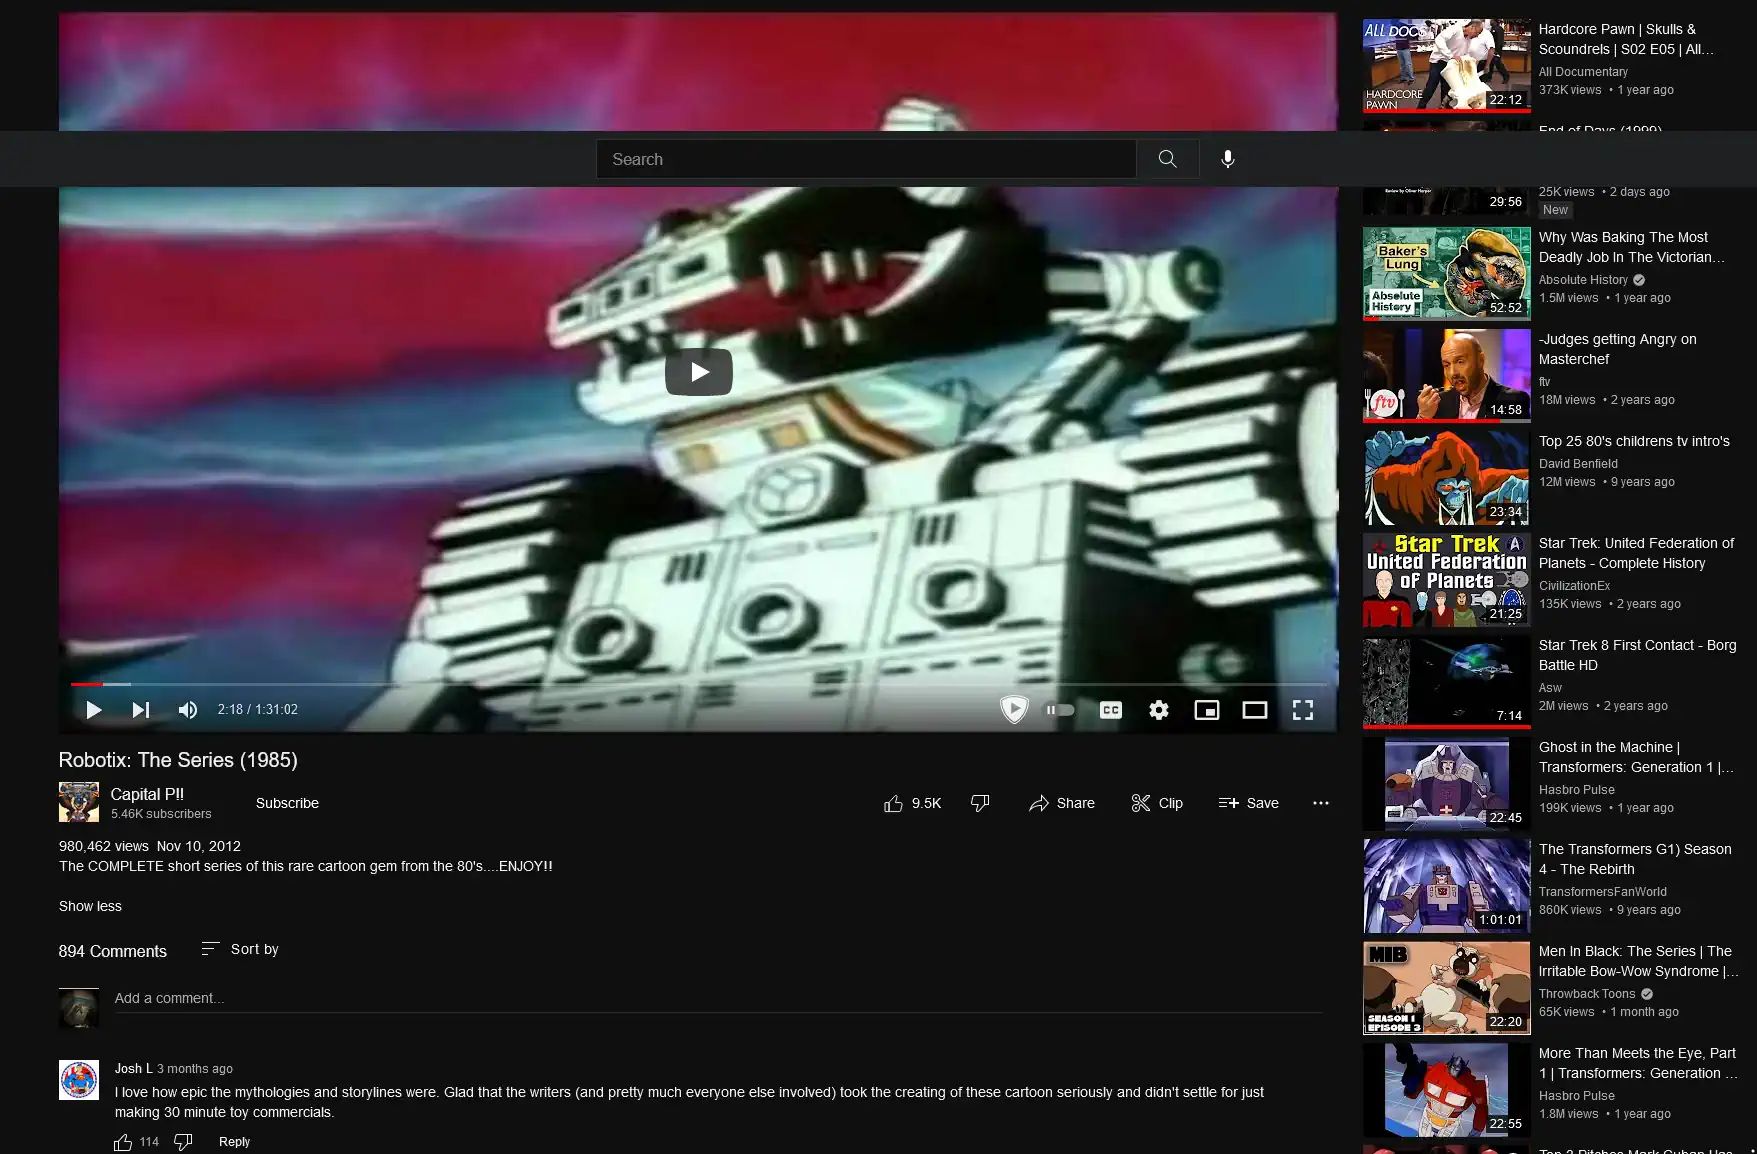 Youtube player layout fixed by Tampermonkey. Nov 2022.